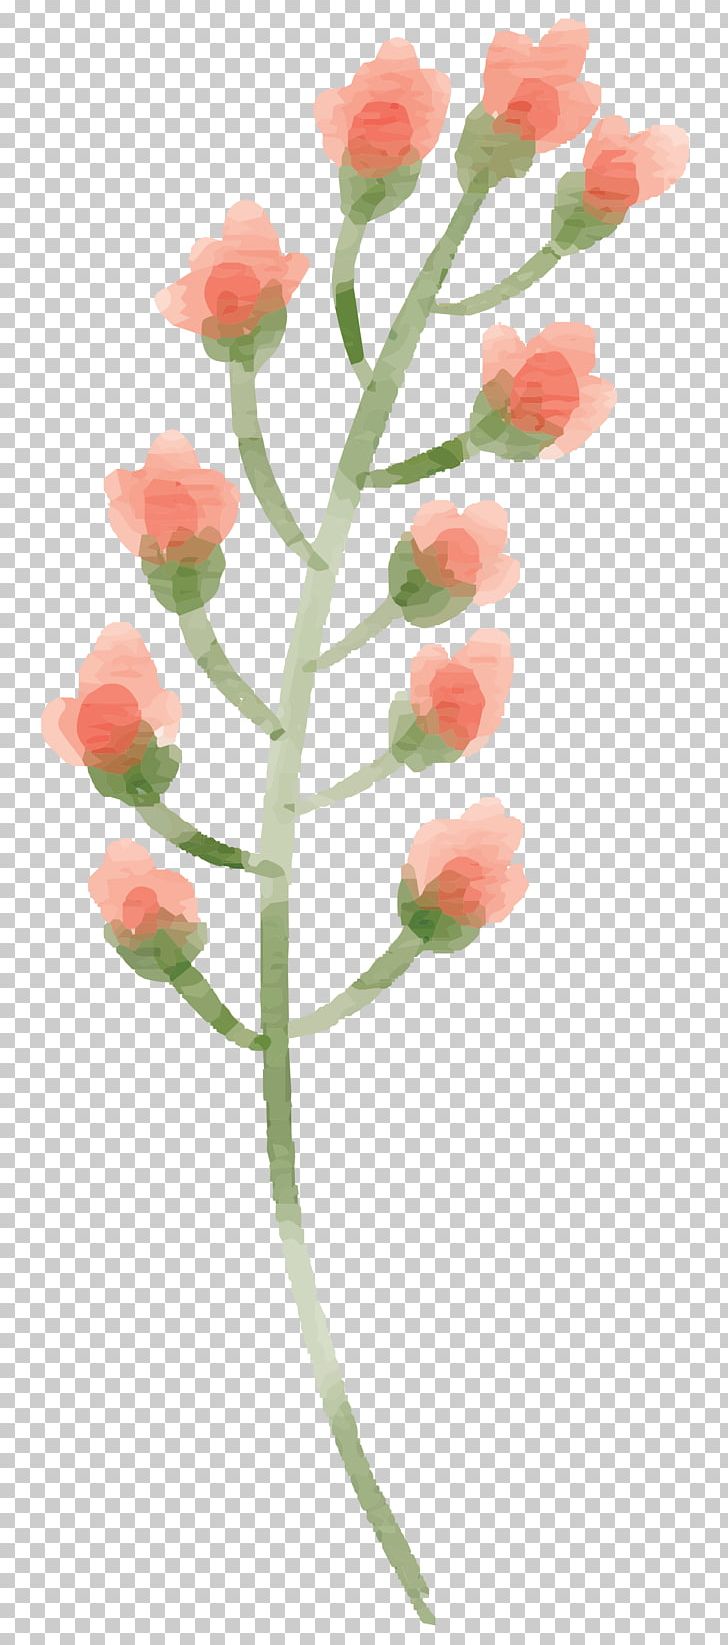 Floral Design Watercolour Flowers Watercolor Painting PNG, Clipart, Blossom, Bud, Cut Flowers, Floral Design, Floristry Free PNG Download